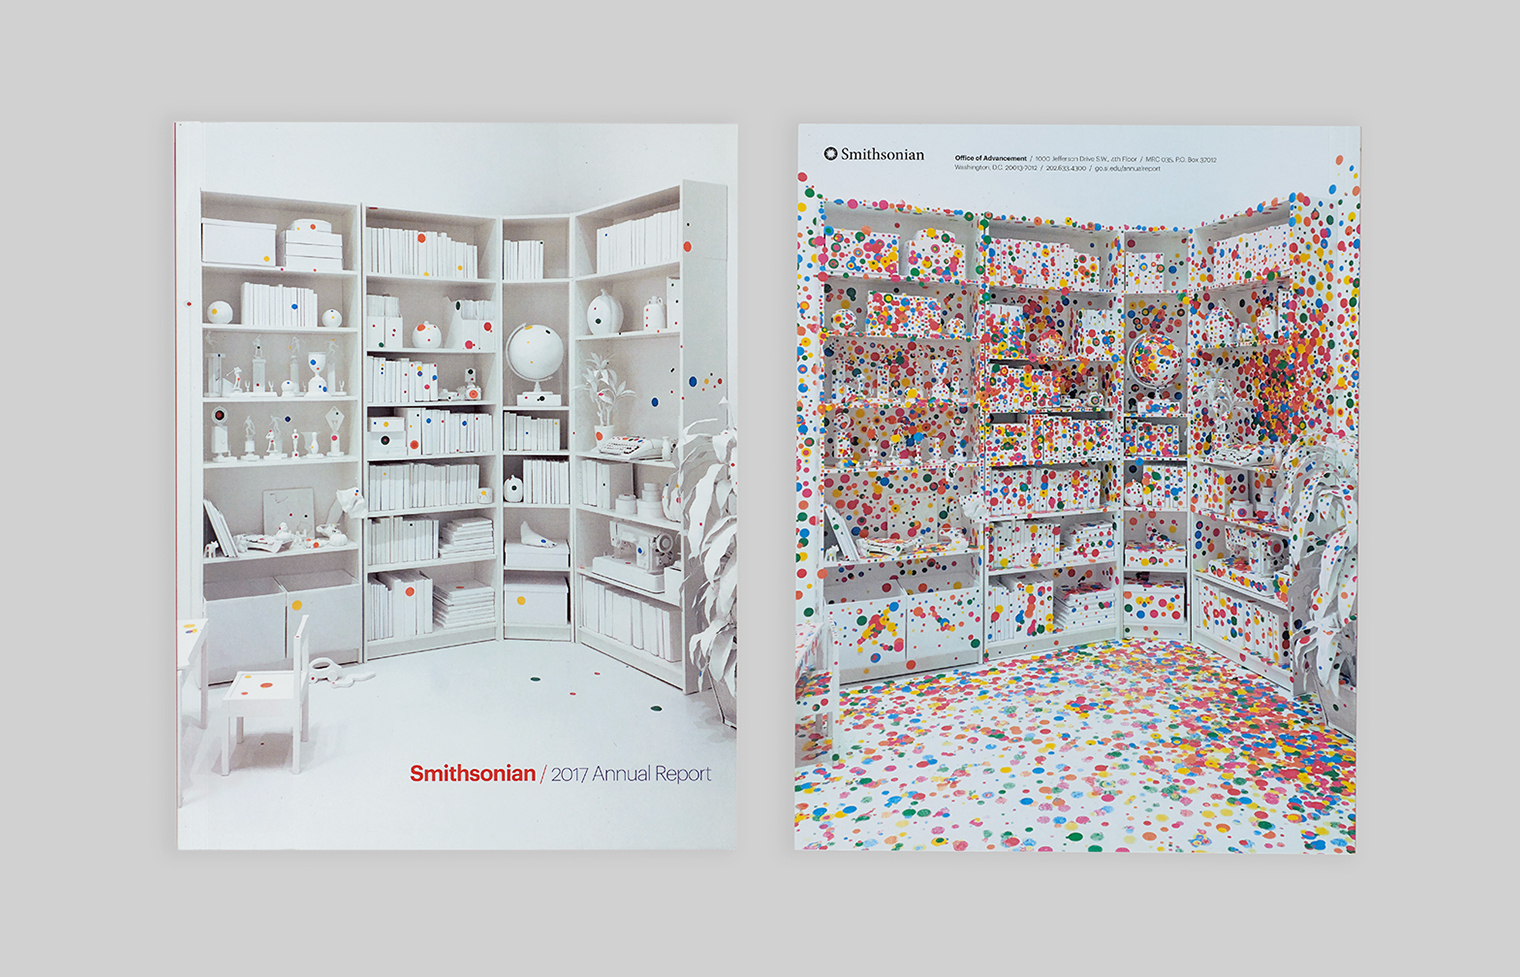 Covers, front and back, show Yayoi Kusama’s “Obliteration Room” at the Hirshhorn before and after visitors placed colored circular stickers.